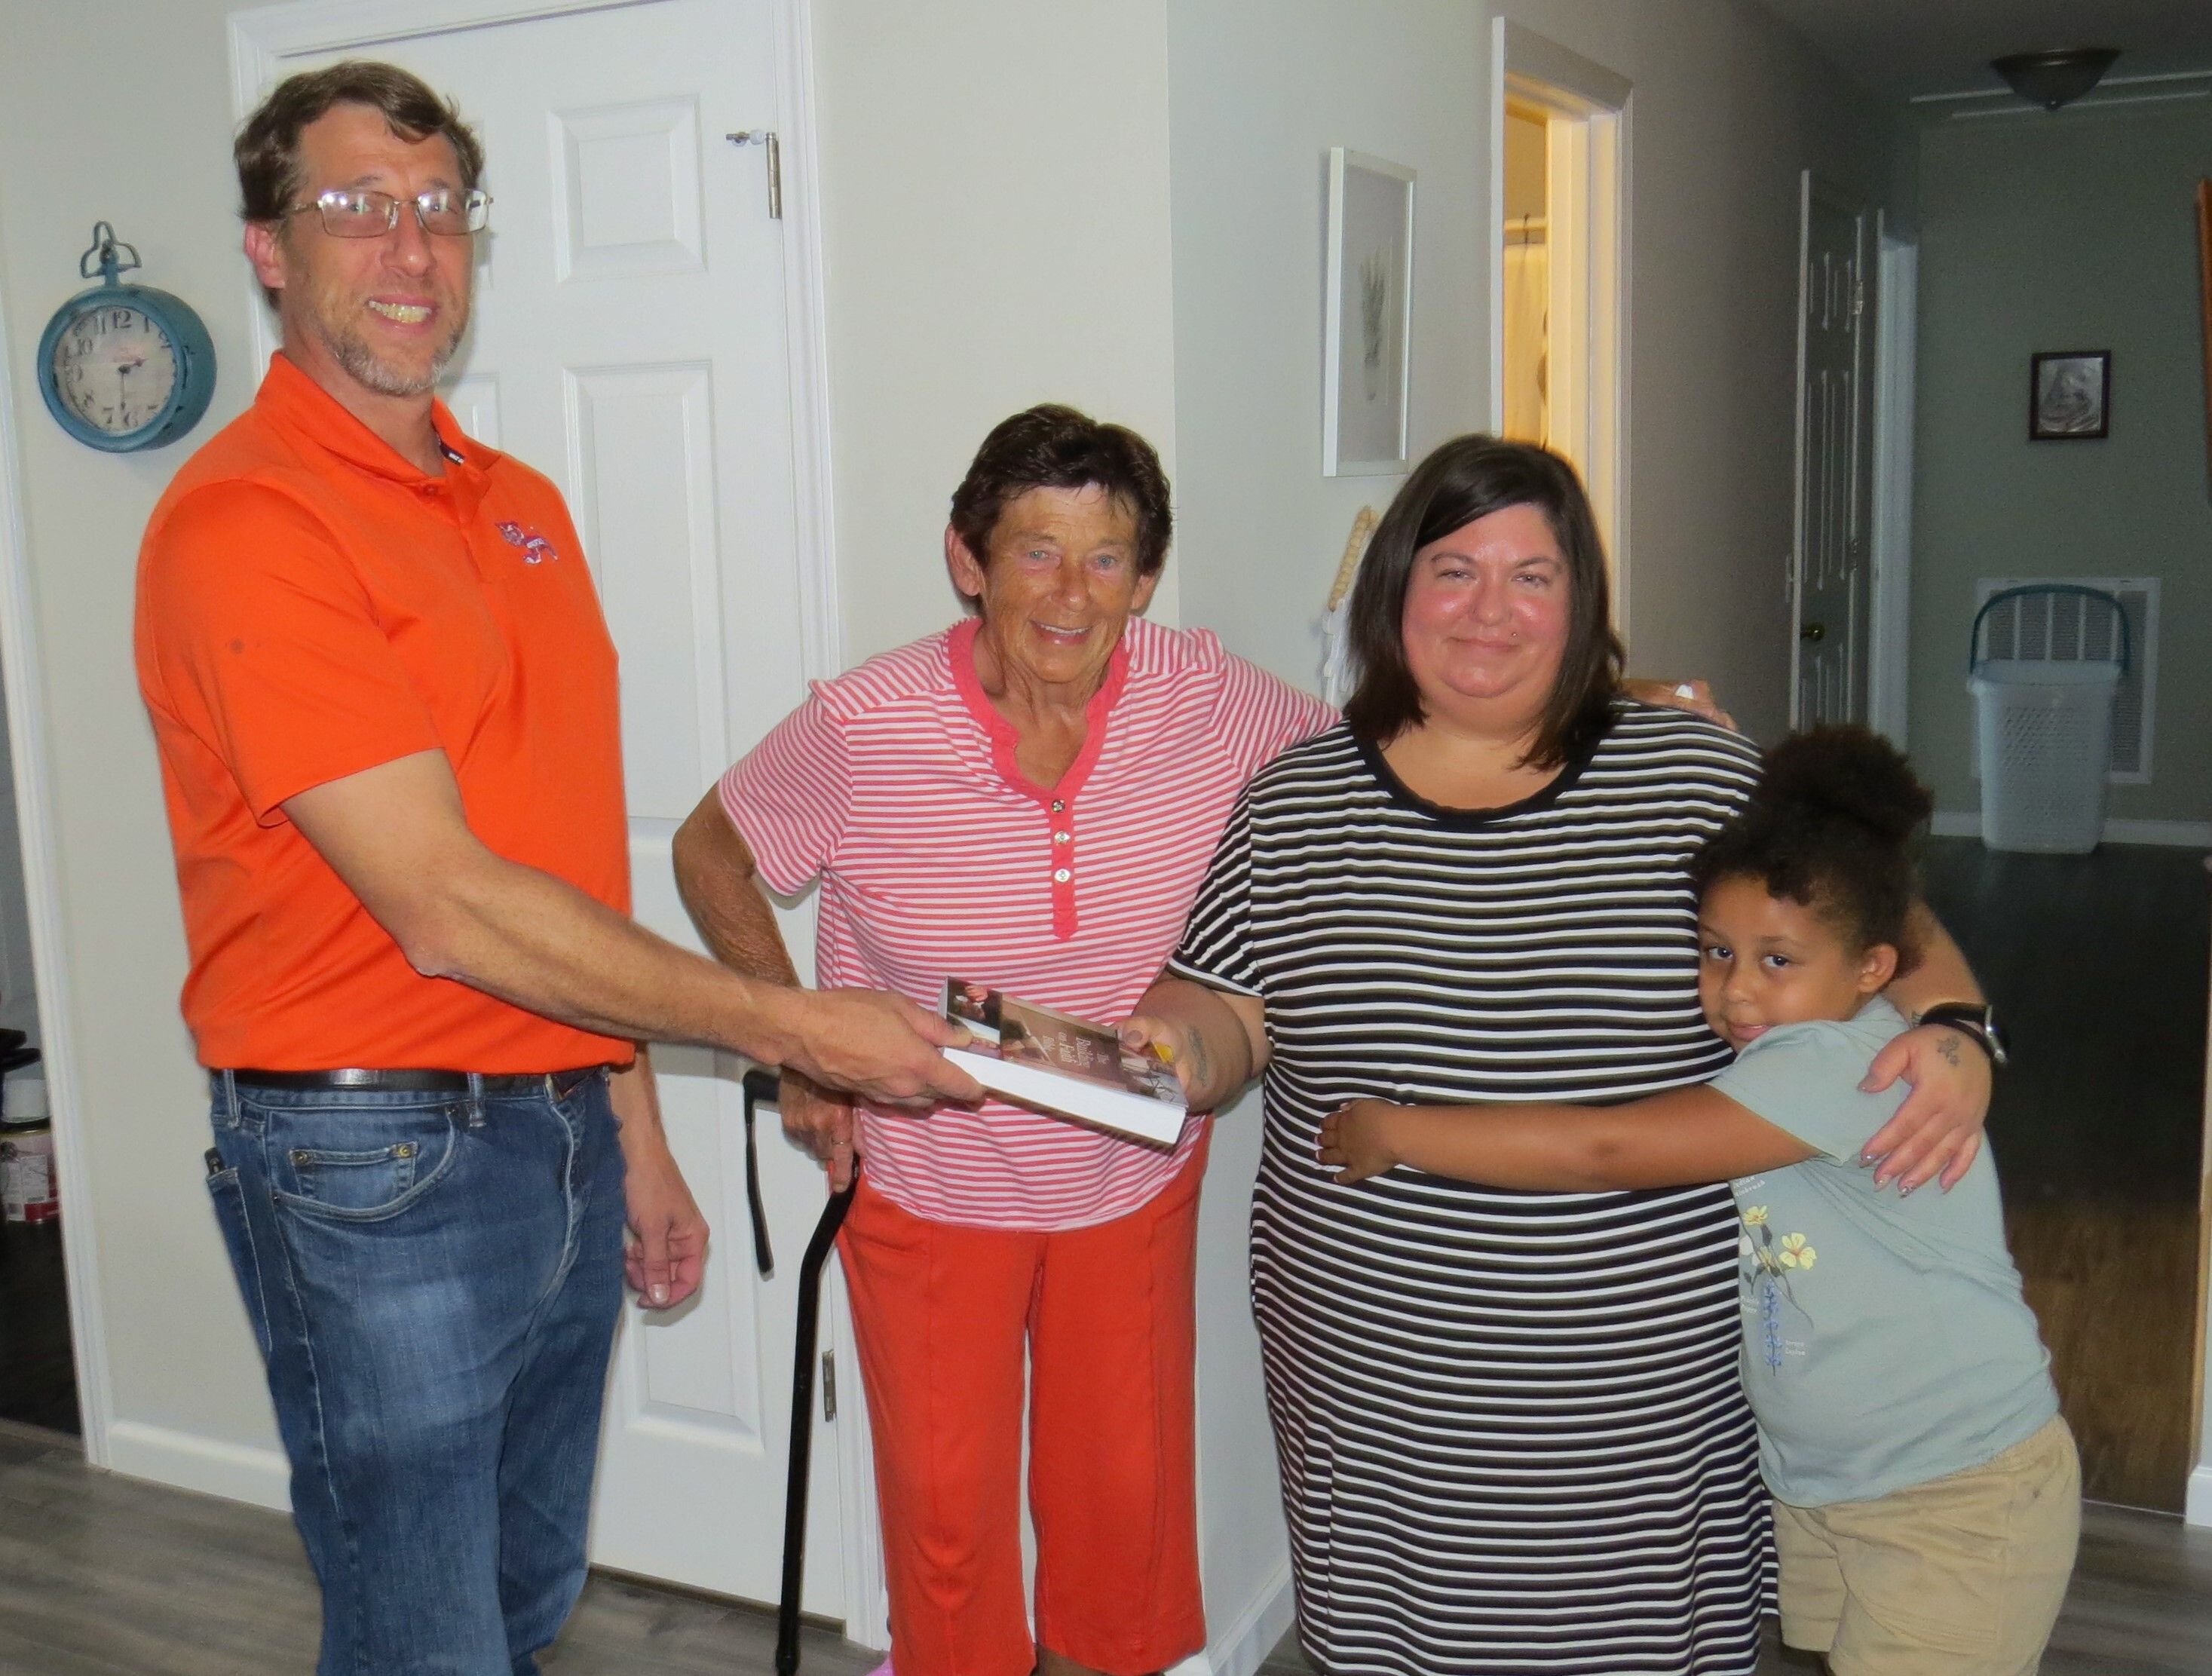 Alley Linder, president of PCHFH Board of Directors, presents a Bible to the Roper family